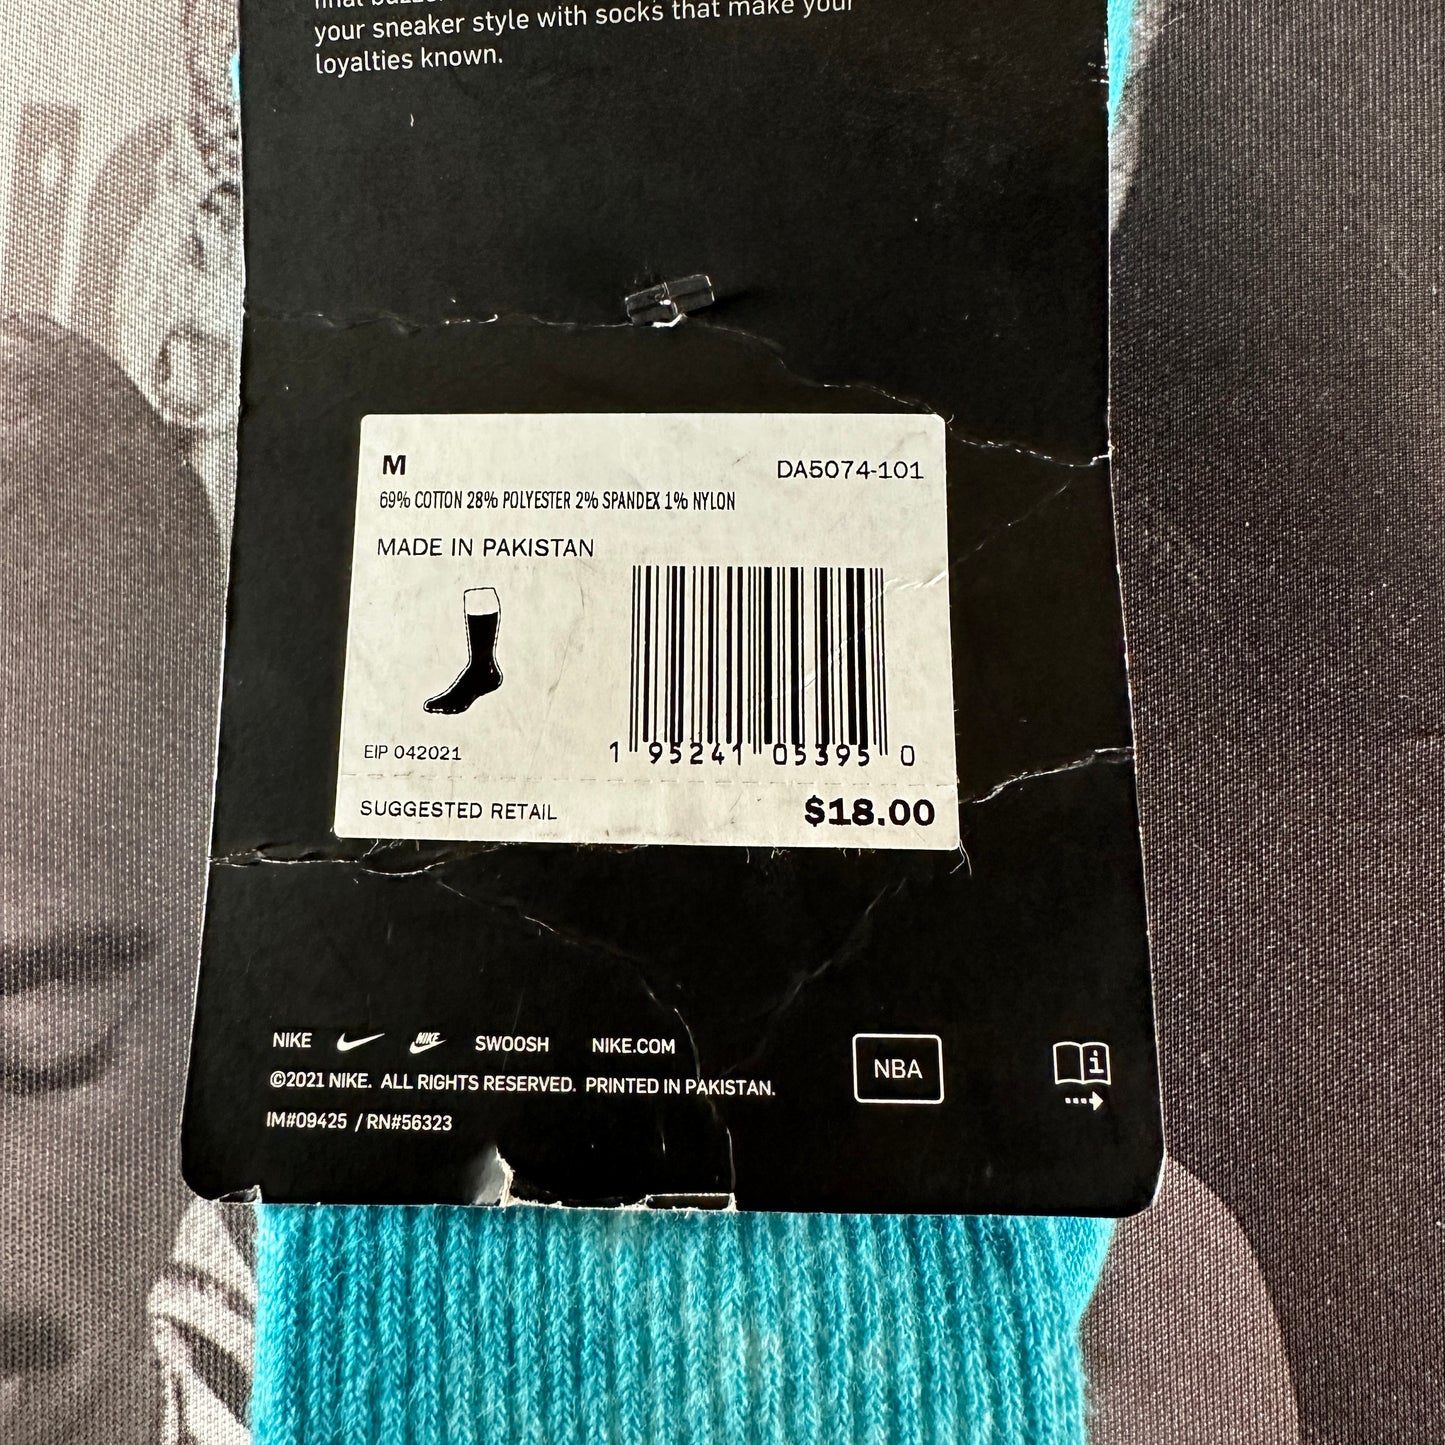 Nike Tie Dye Quick Dry Breathable Sports Socks Couple Style One Pair Blue DA5074-101